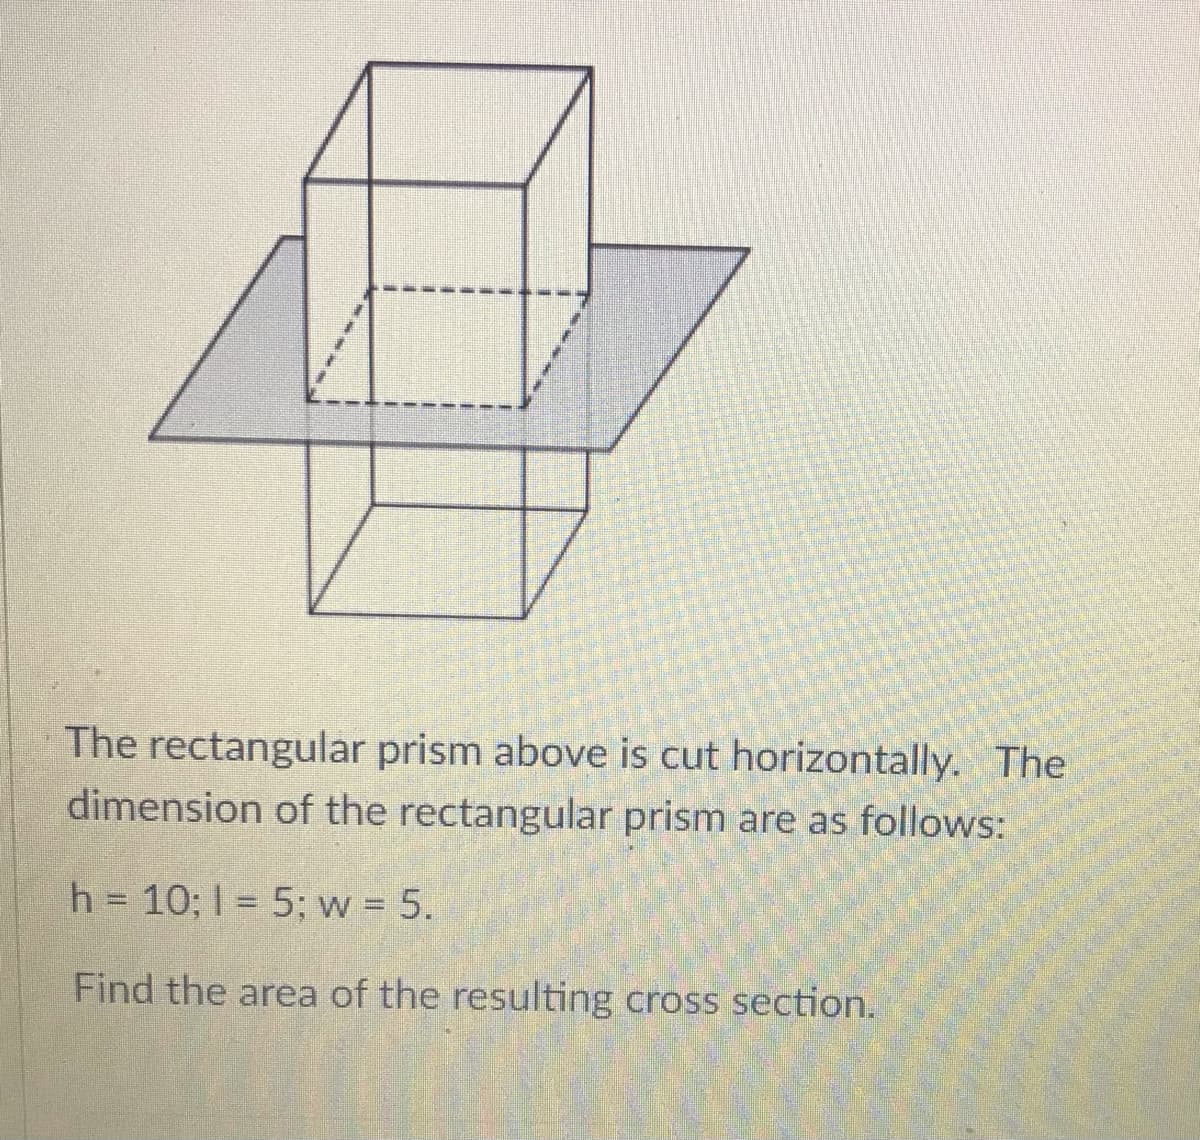 The rectangular prism above is cut horizontally. The
dimension of the rectangular prism are as follows:
h = 10; 1 = 5; w 5.
Find the area of the resulting cross section.
